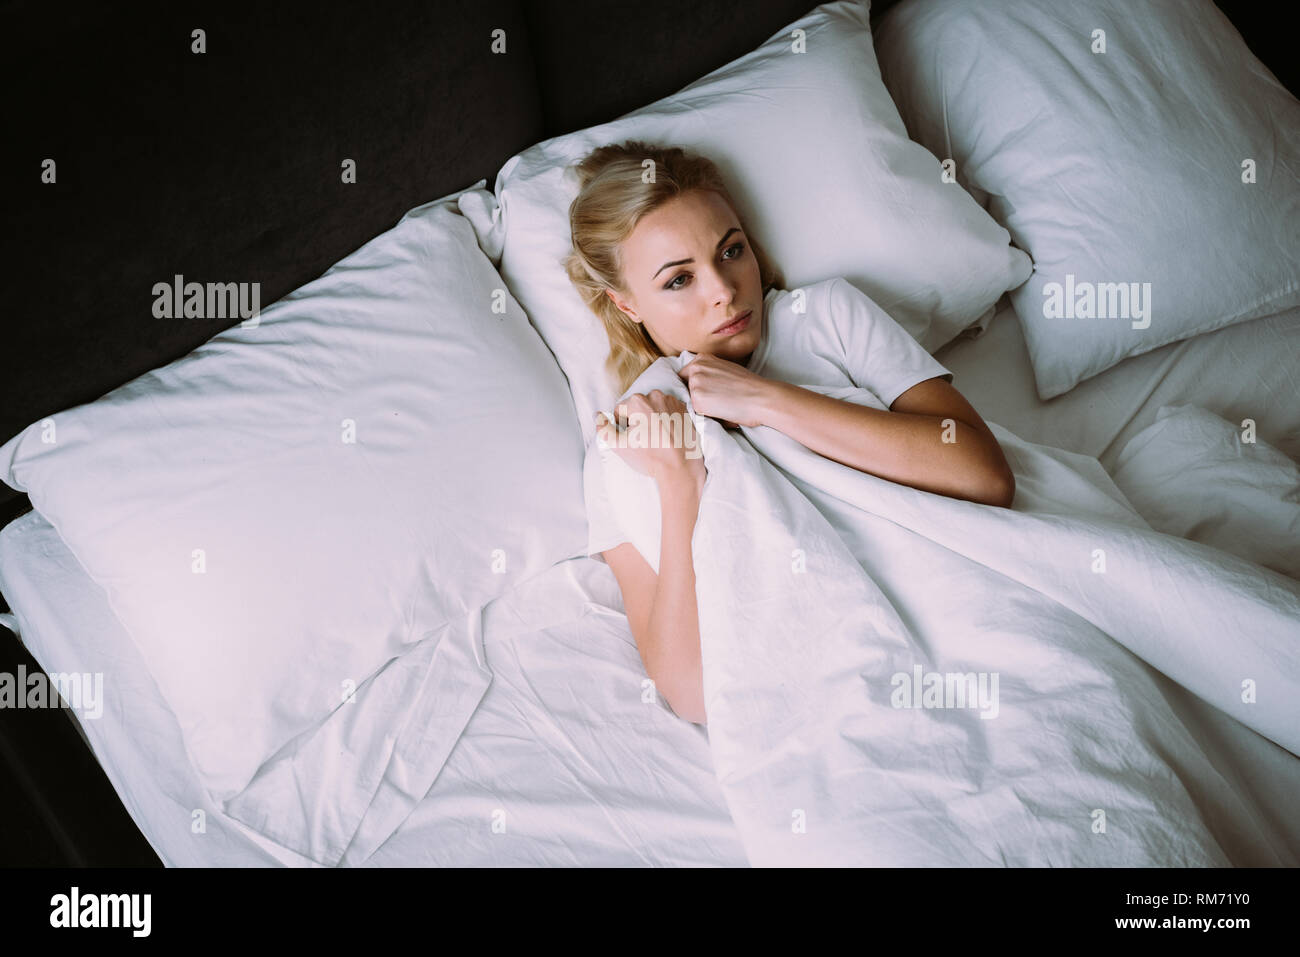 frightened woman holding blanket and lying